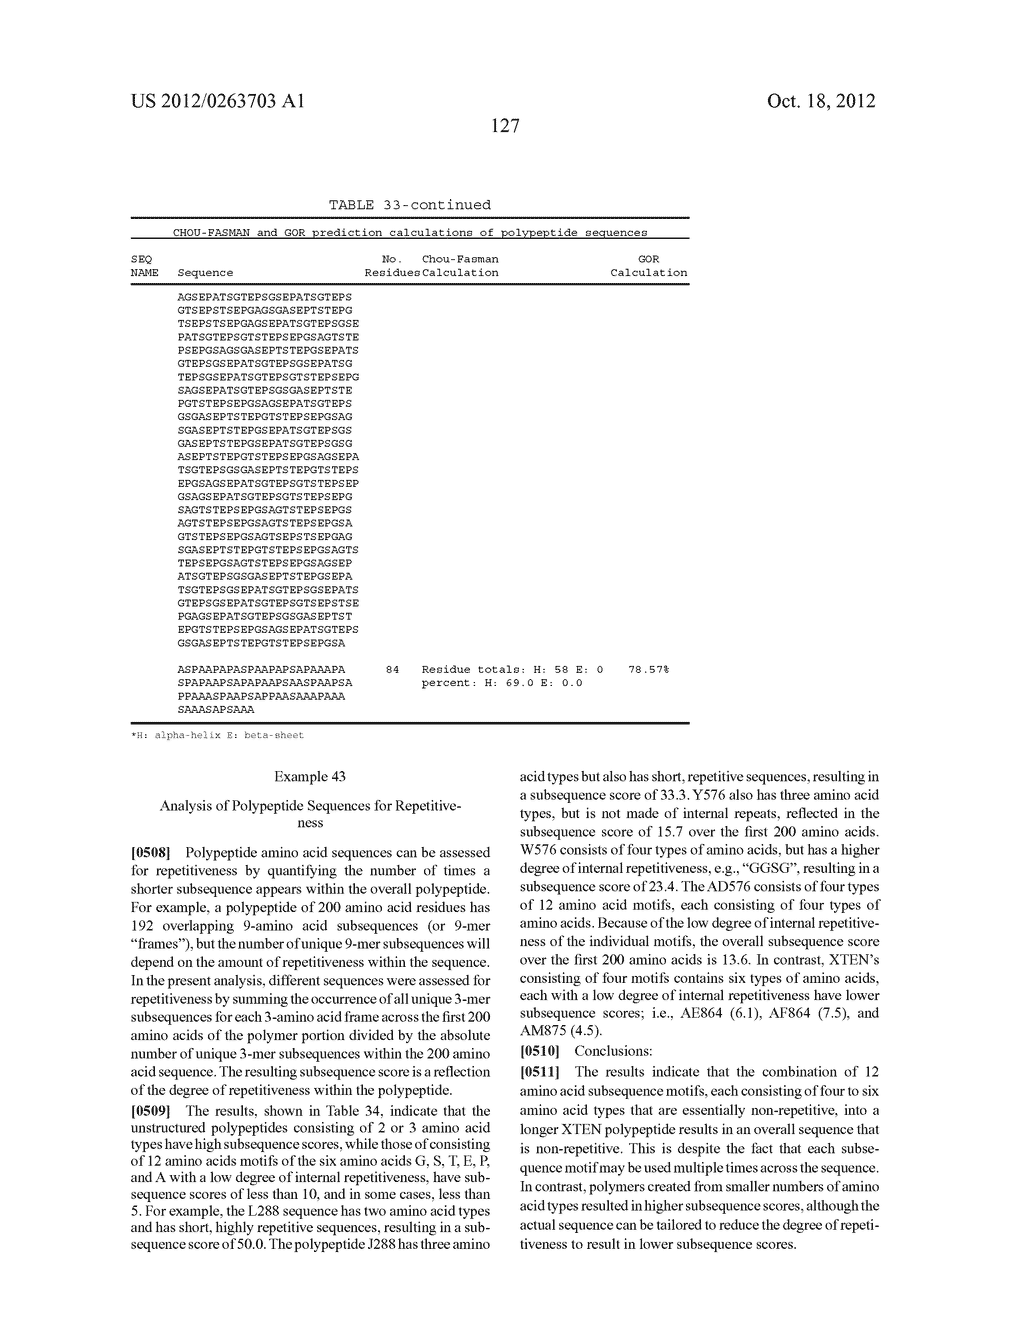 COAGULATION FACTOR IX COMPOSITIONS AND METHODS OF MAKING AND USING SAME - diagram, schematic, and image 164